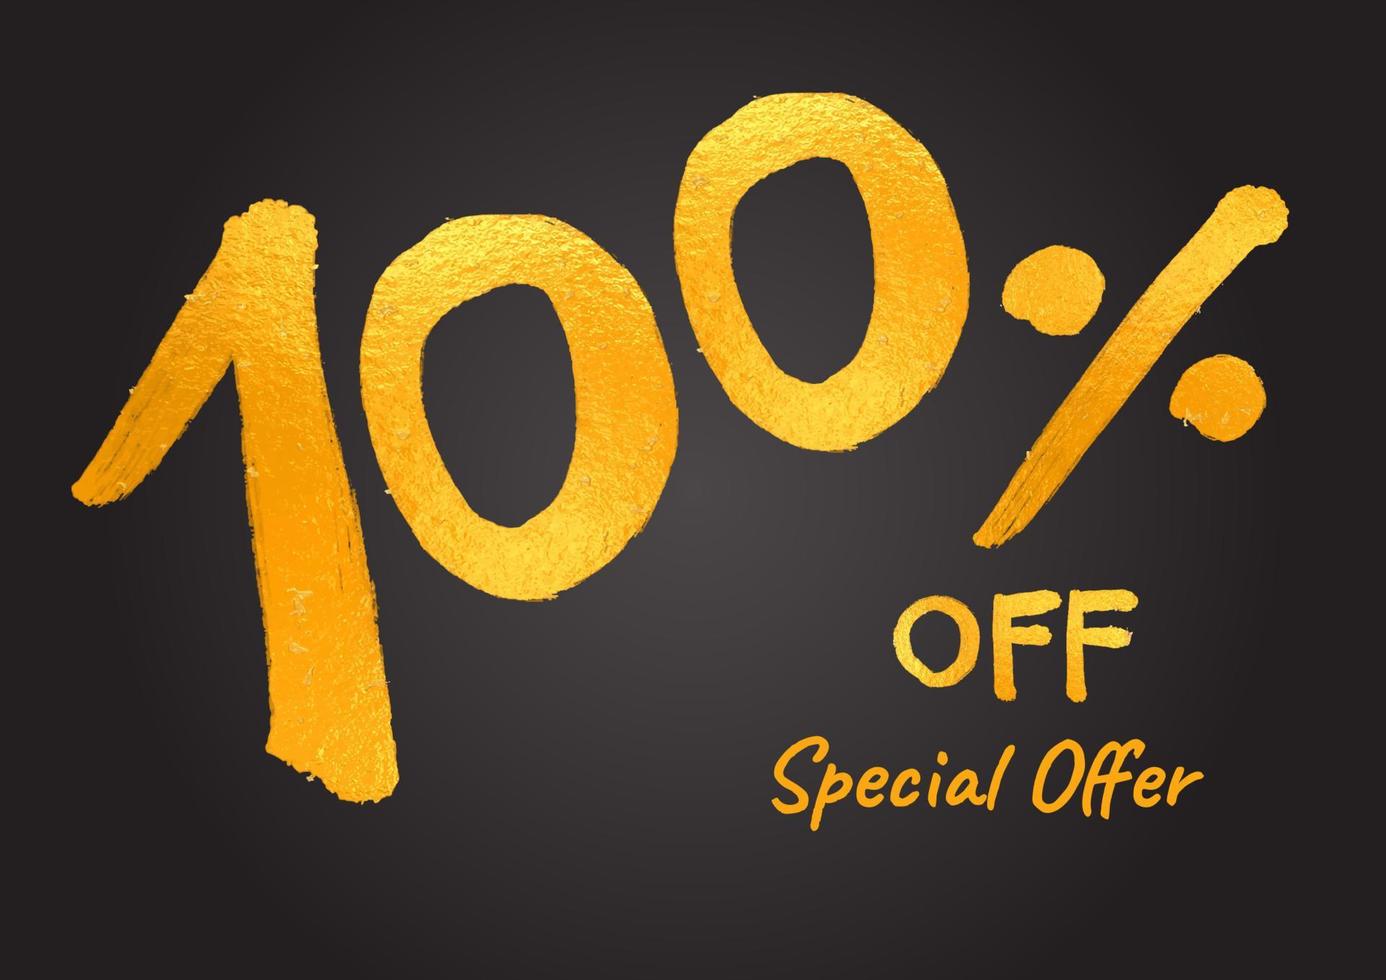 100 percent off Special Offer Gold Lettering Numbers brush drawing hand drawn sketch vector